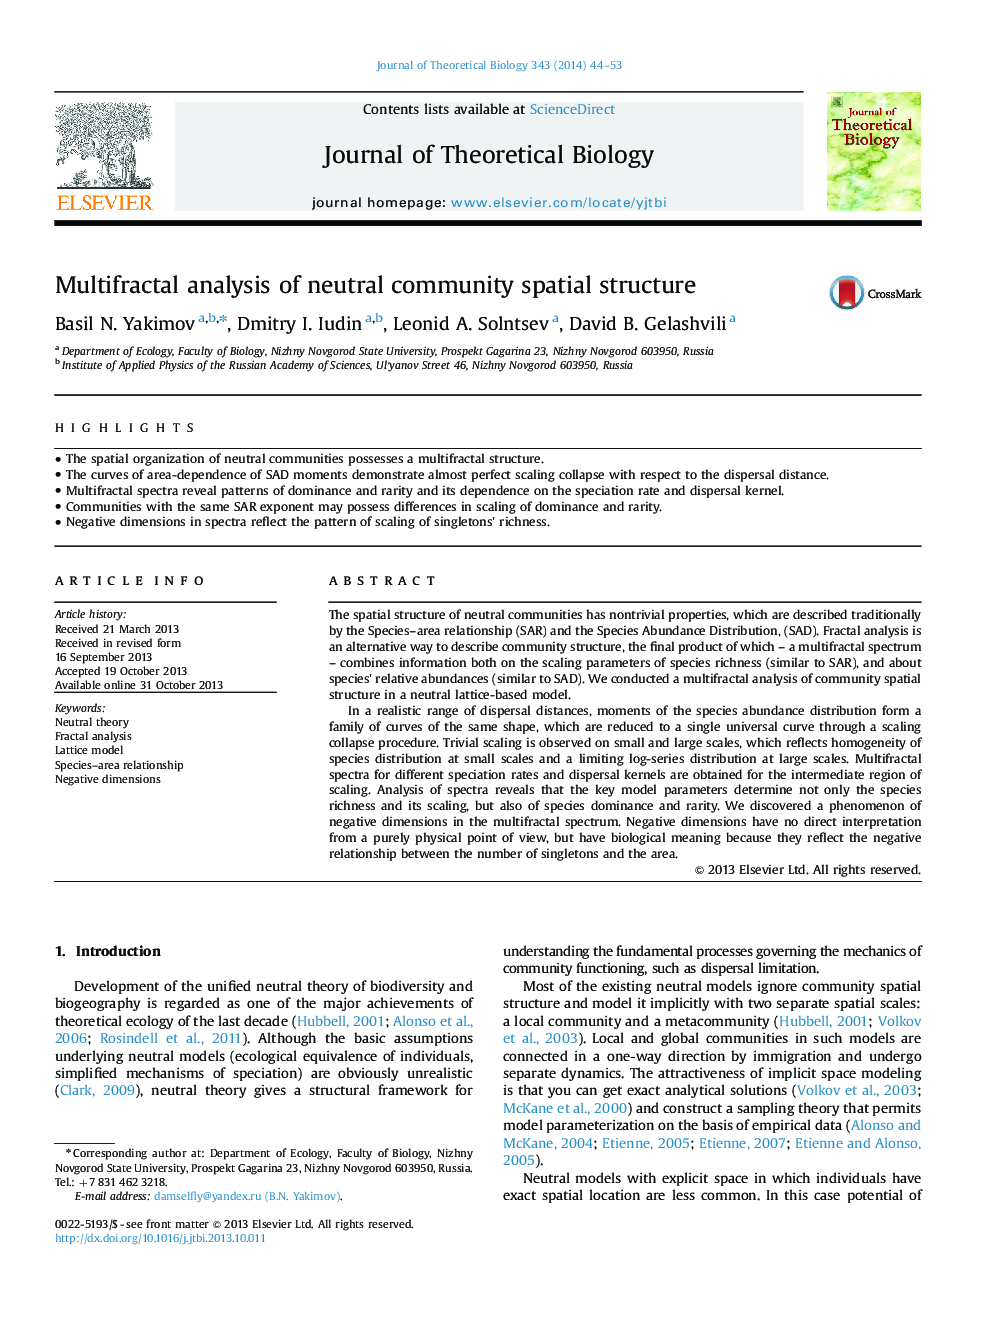 Multifractal analysis of neutral community spatial structure